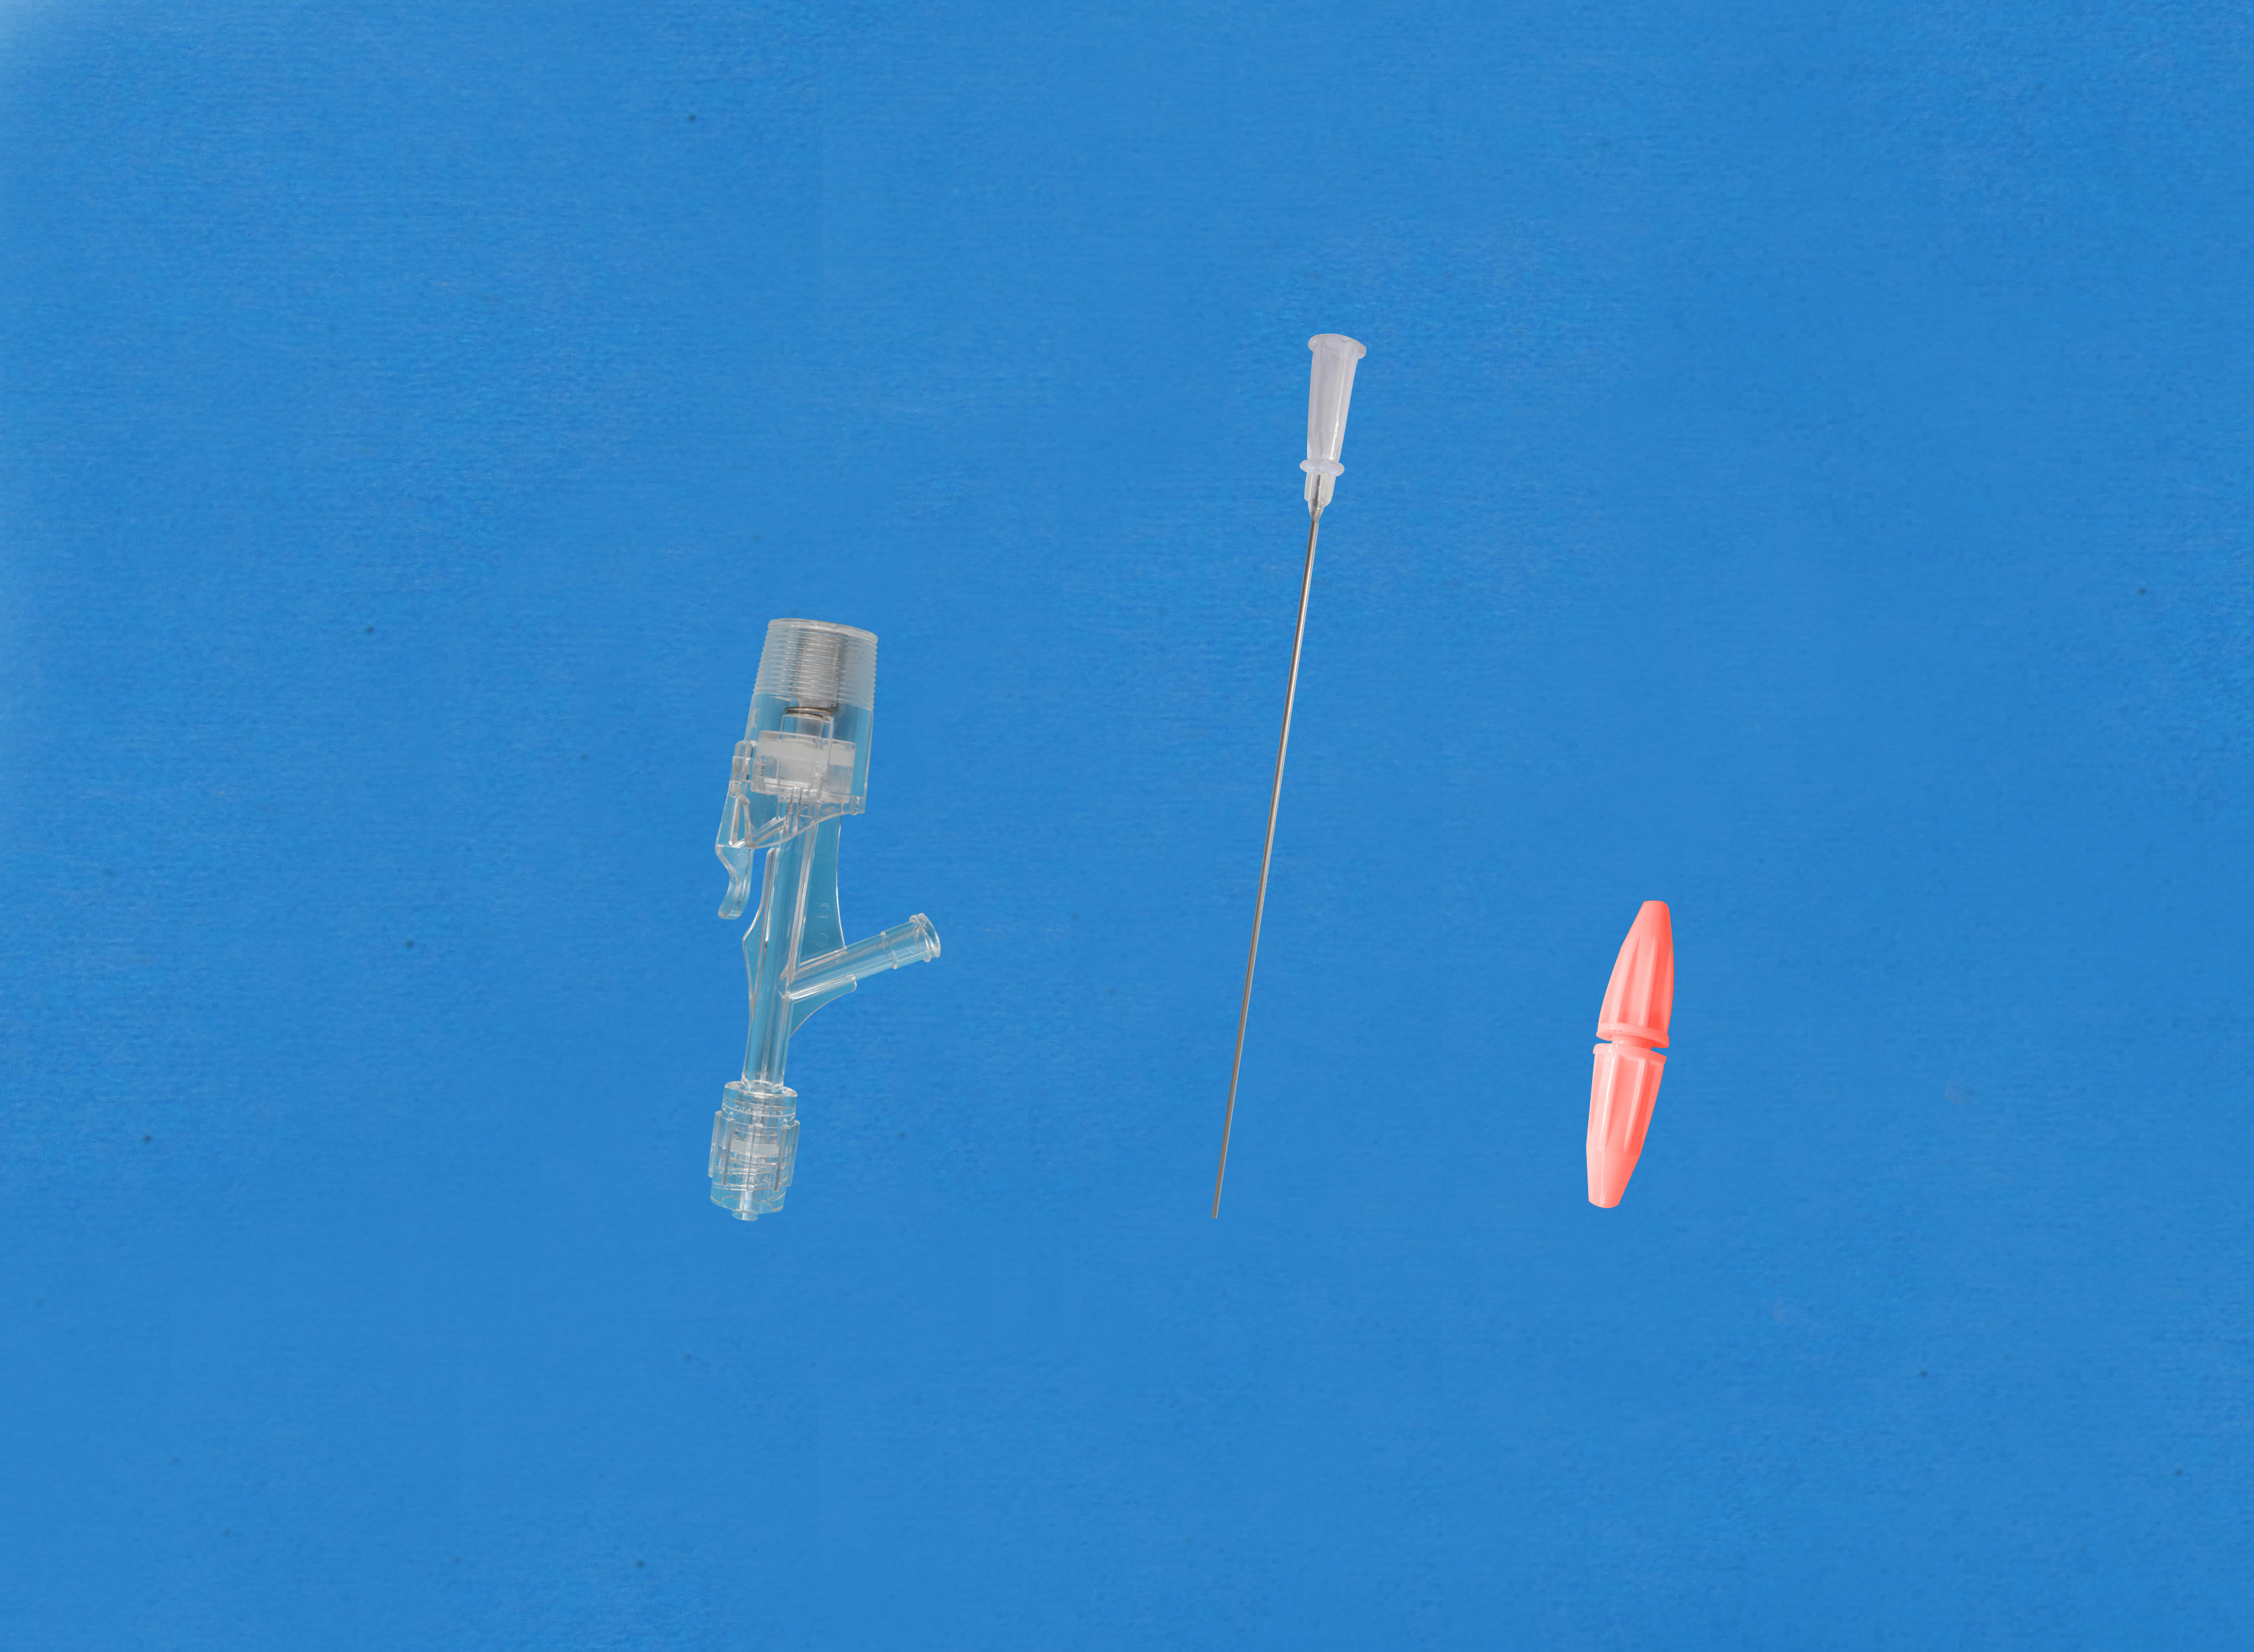 Haemostatic valves, Y click, Sideon Female Luer, Insertion Tool with Small Hub, Red/Plastic Torquer